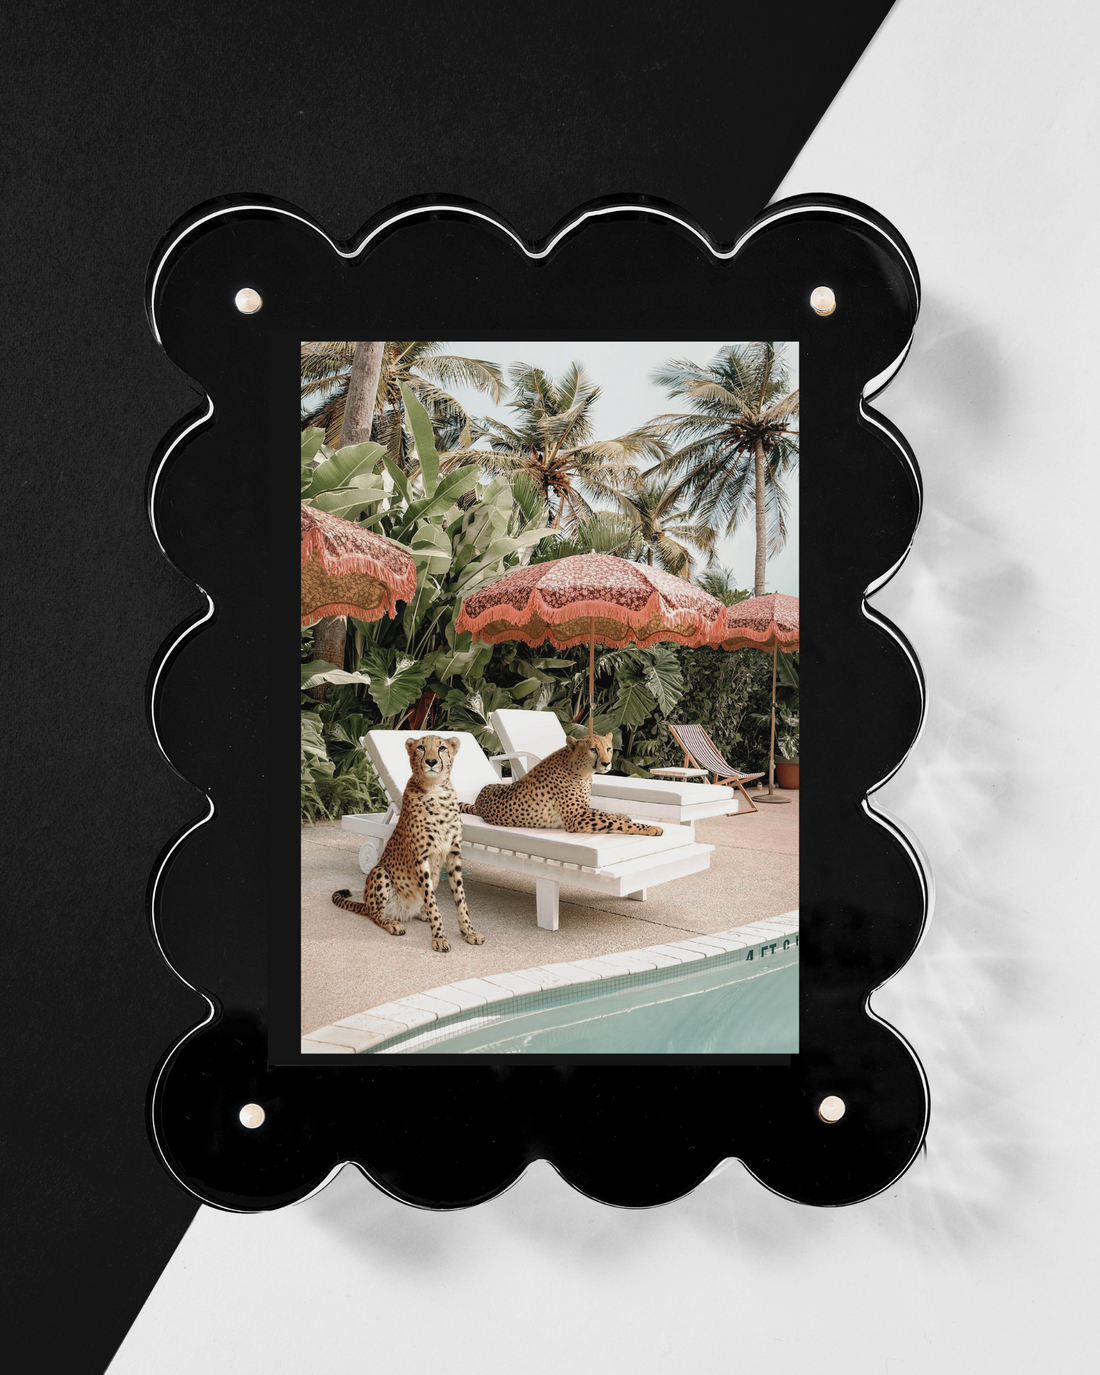 Tart By Taylor - BLACK ACRYLIC PICTURE FRAME